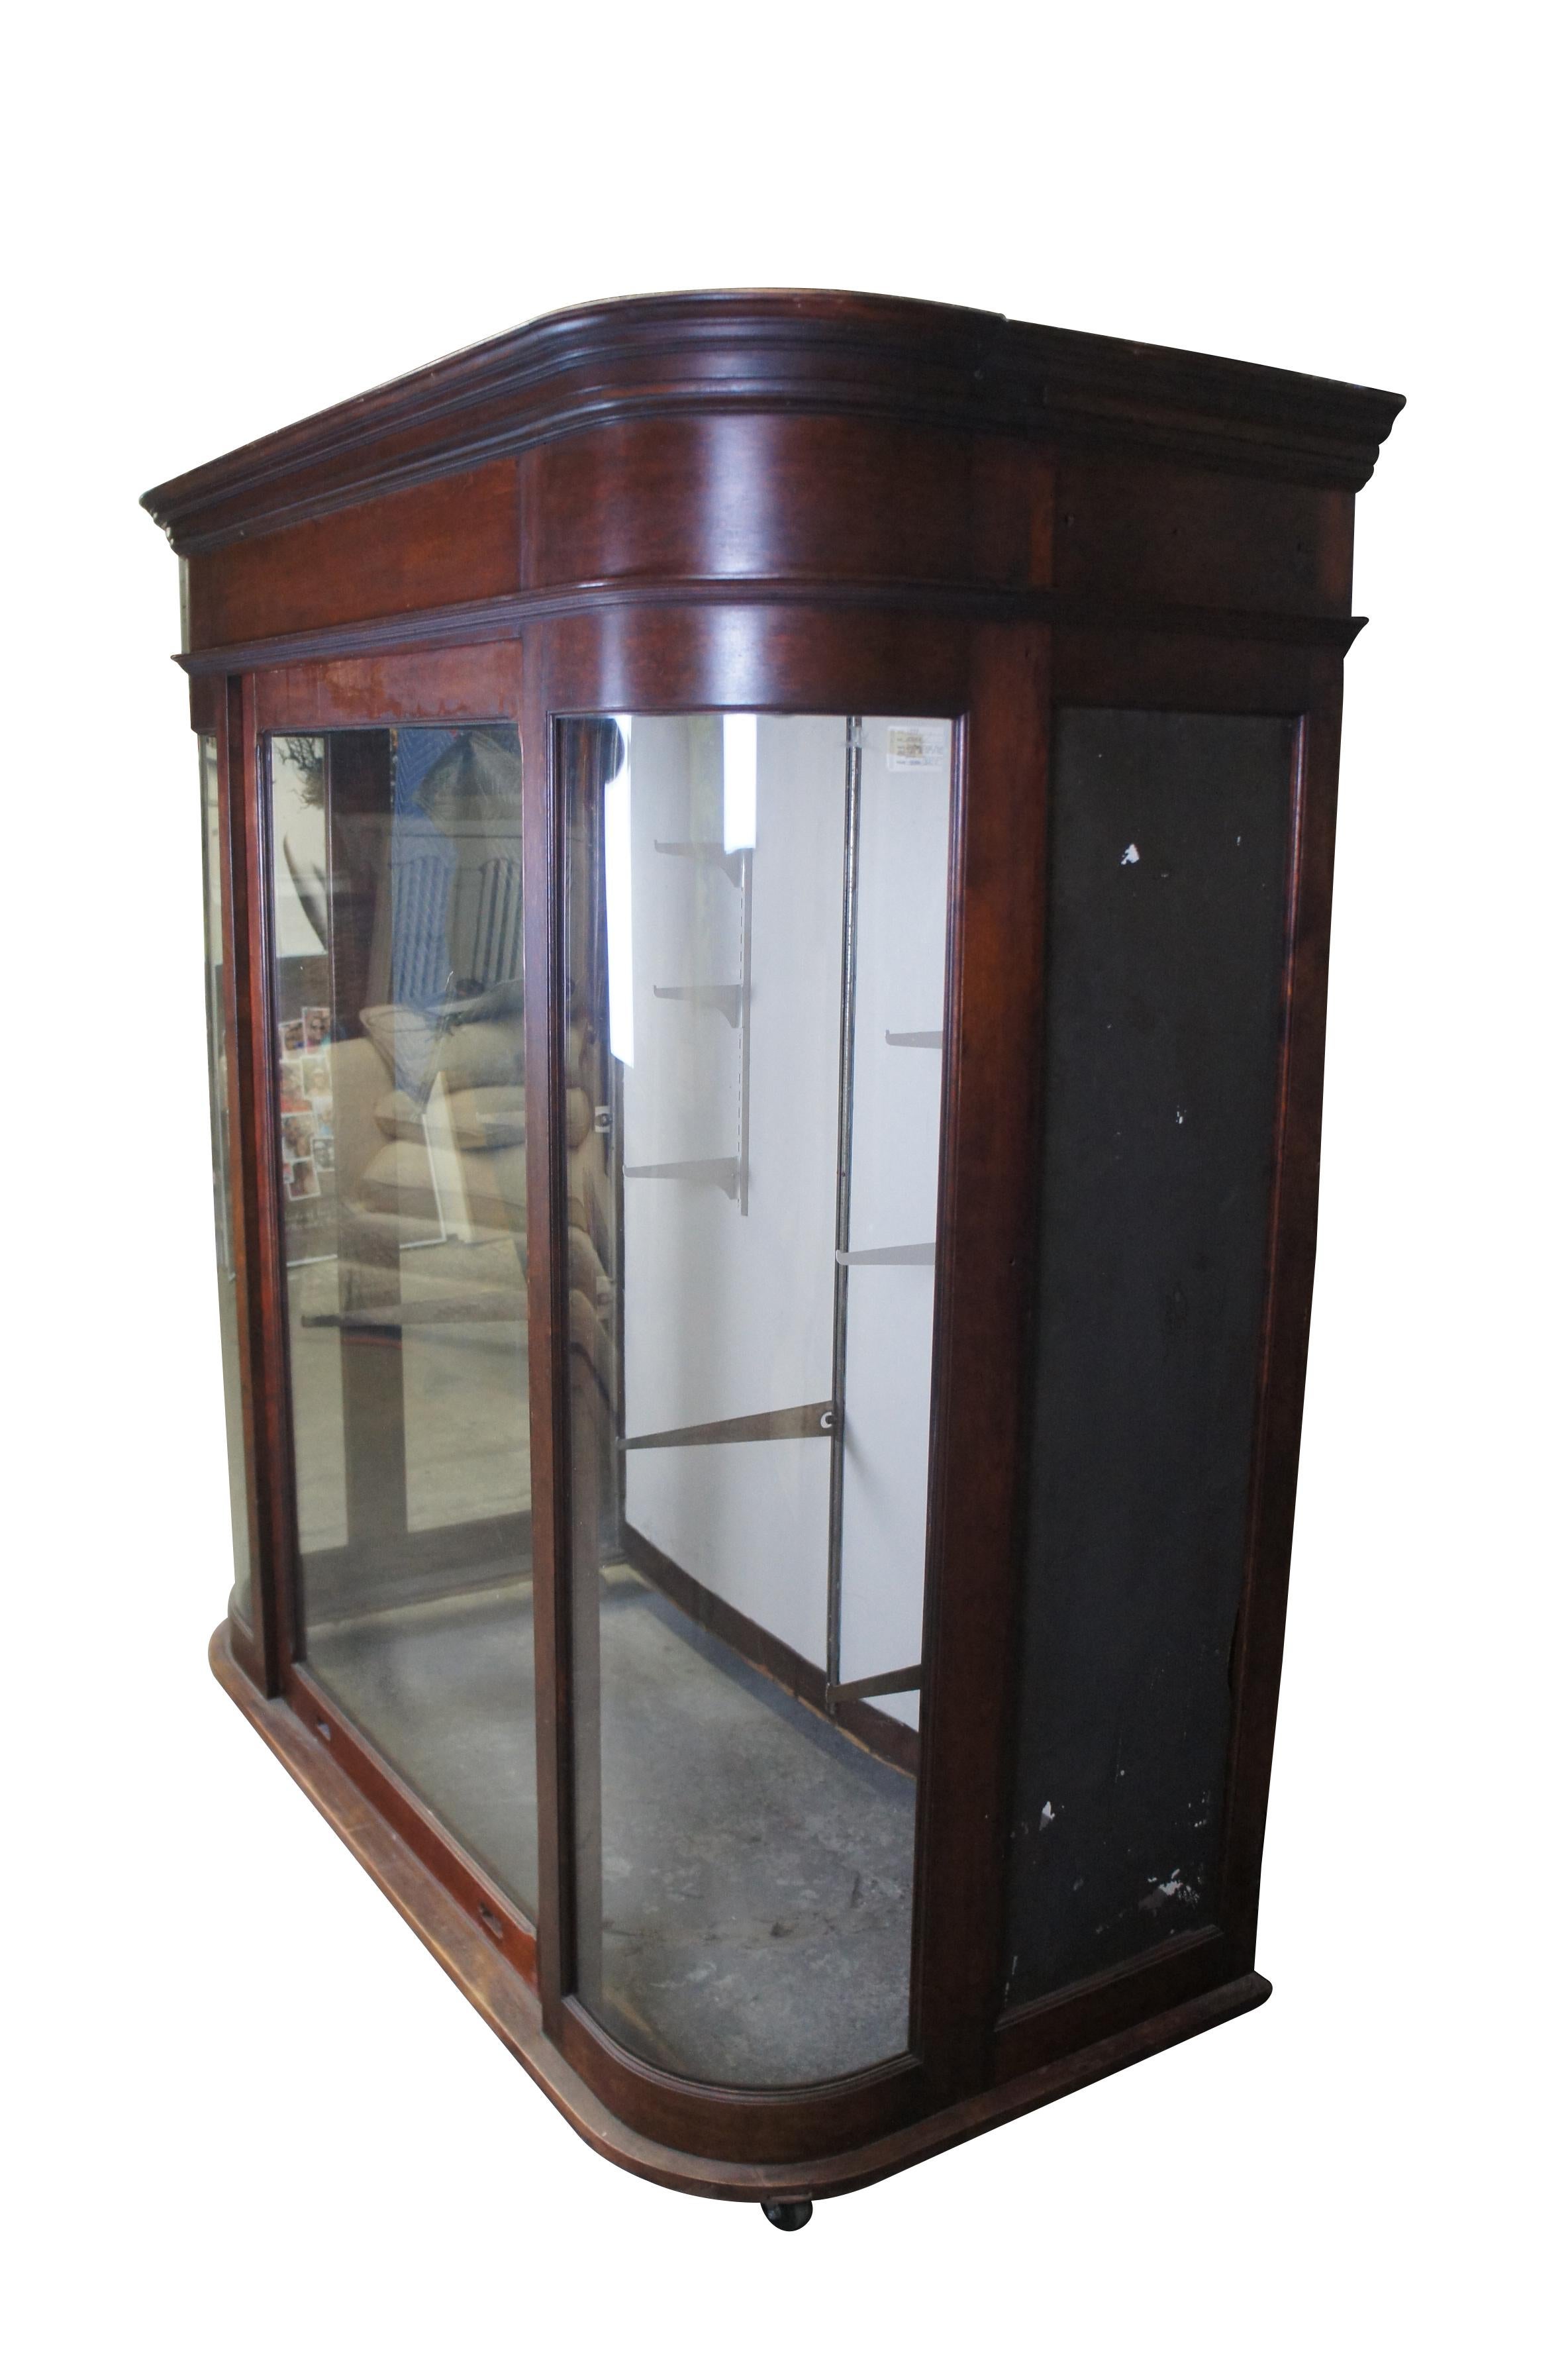 Monumental Victorian general store / apothecary display cabinet. Made from mahogany with curved glass and a large weight driven door that extend through the top. Most recently used at a tire shop in Xenia Ohio.  This cabinet would be most impressive